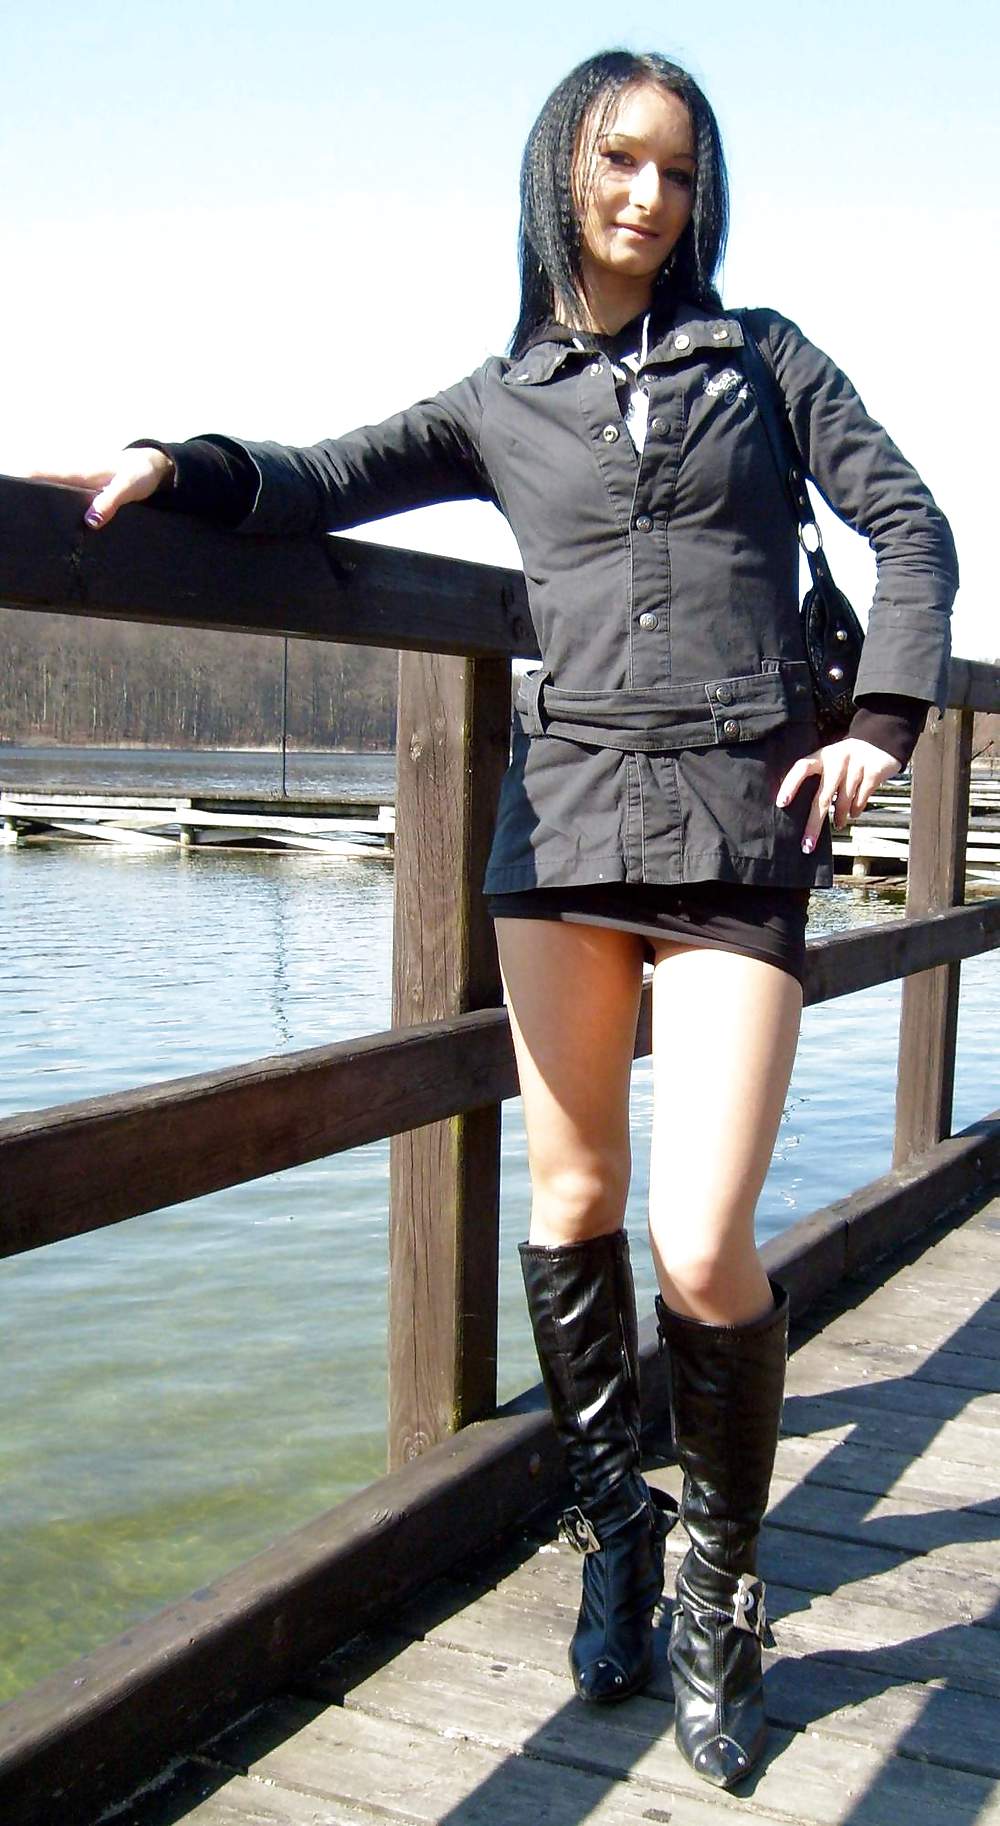 Boots & Woman - Perfect Match... (4) adult photos